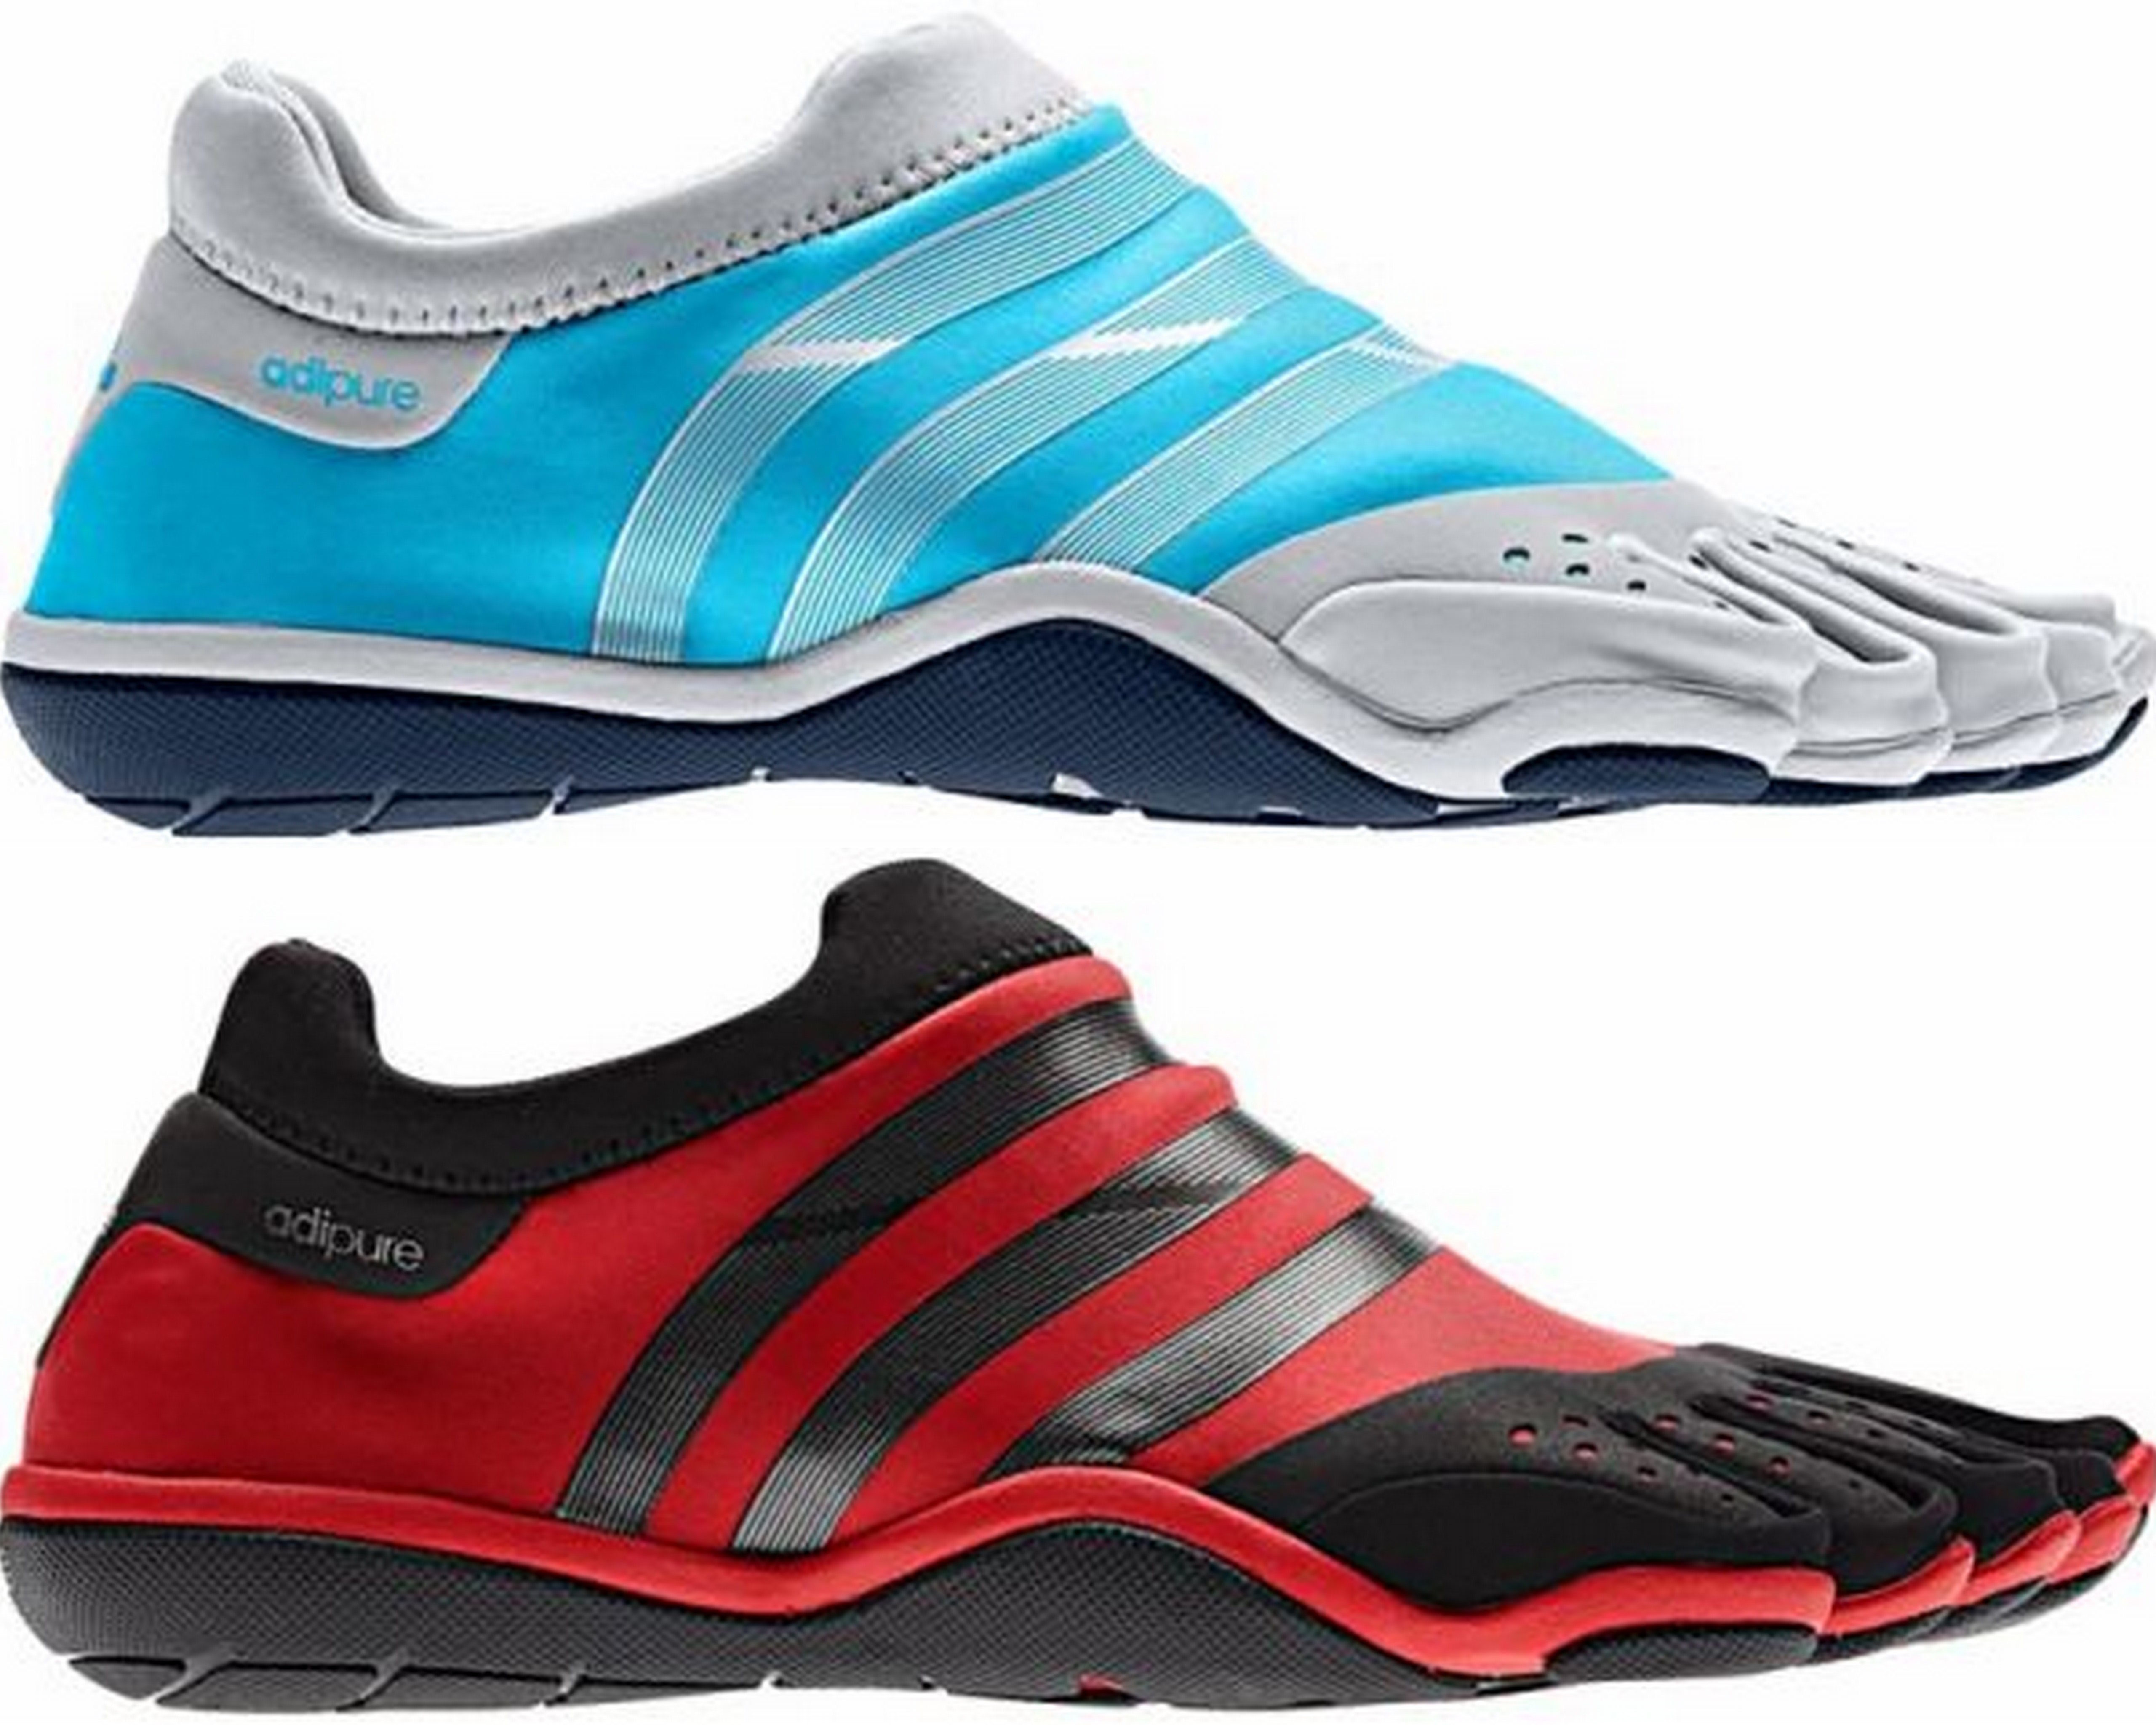 The Adidas AdiPure Trainer toe shoes mark the first entry by Adidas in to the five-toed footwear market.  Photo credit: Associated Press.